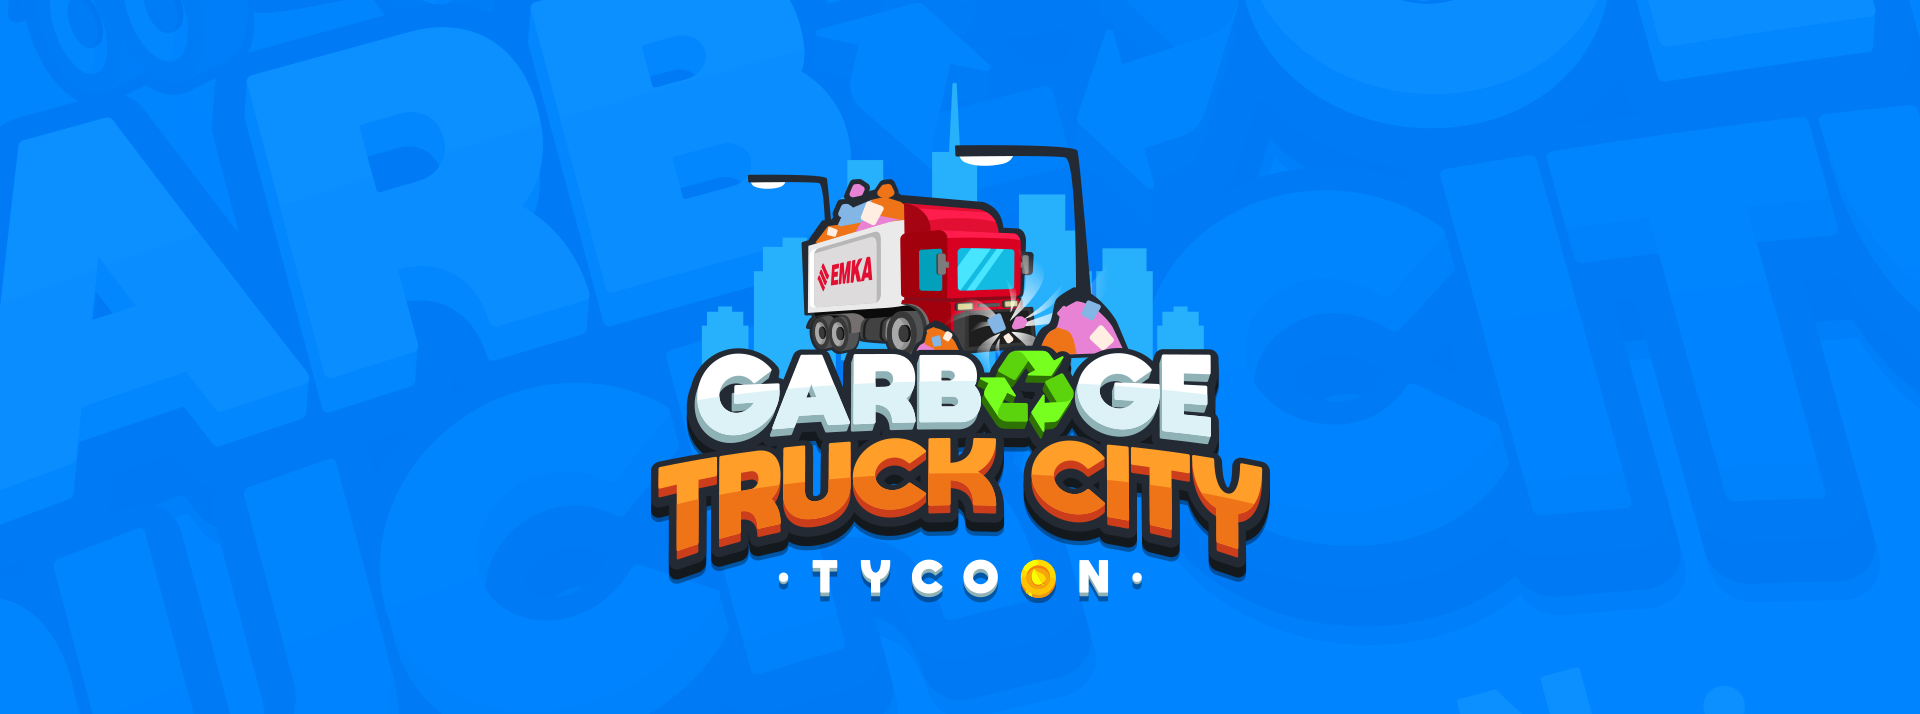 Garbage Truck City Tycoon